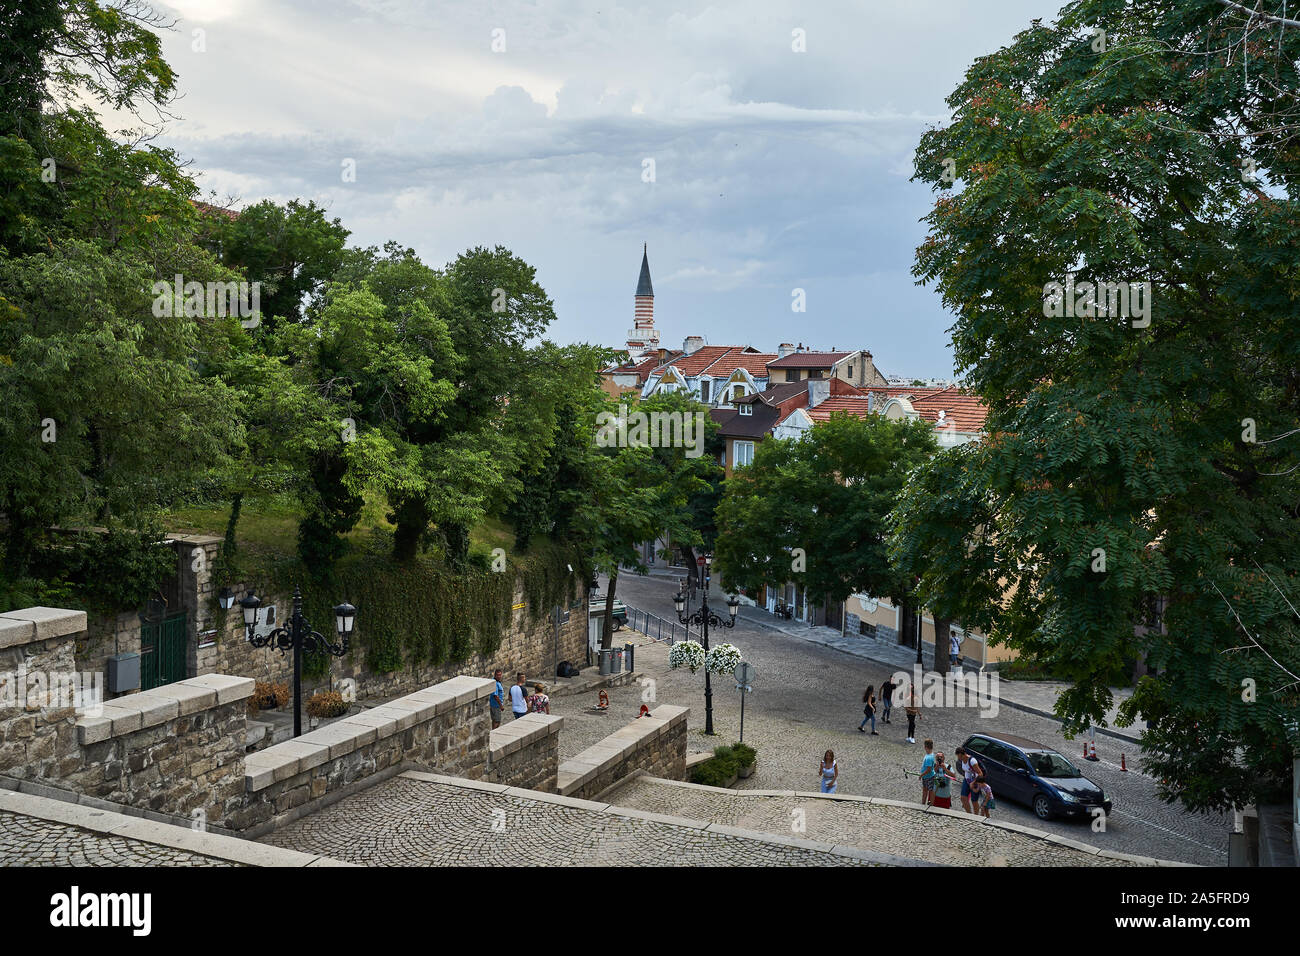 PLOVDIV, BULGARIA - JULY 02, 2019: The view on the city. Plovdiv is the second largest city in Bulgaria. Stock Photo